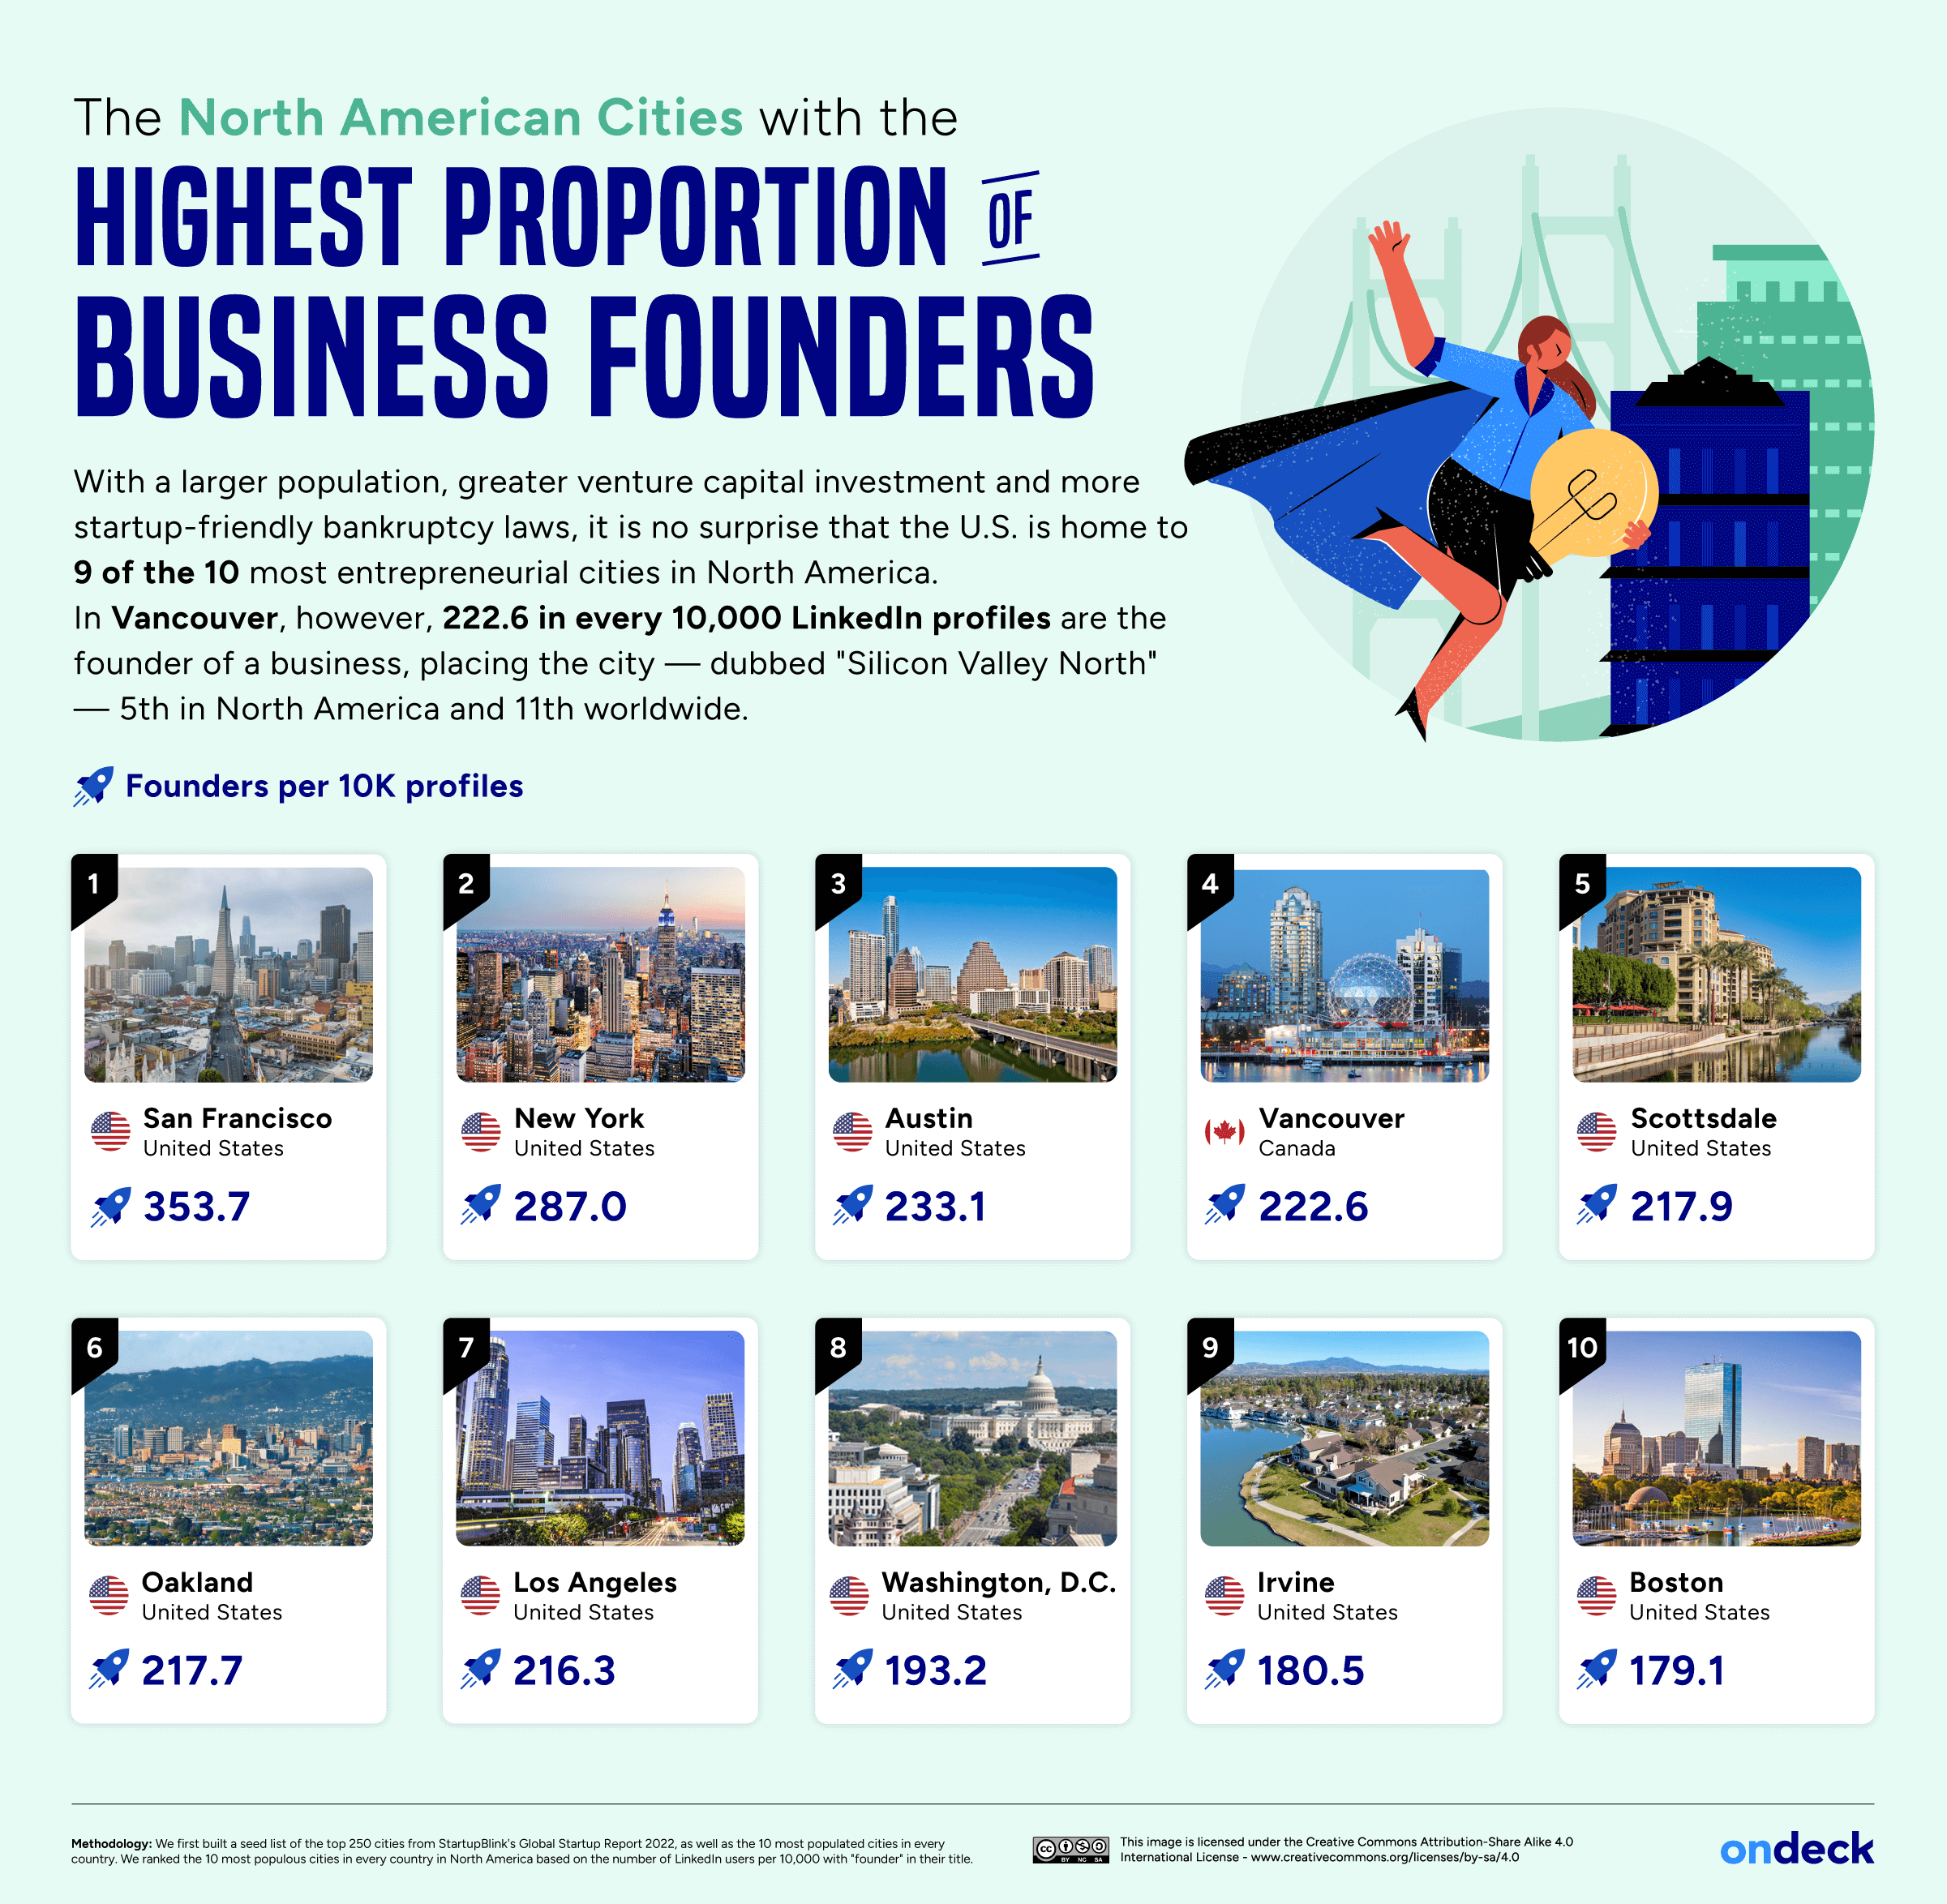 Infographic showing the North American cities with the most business founders